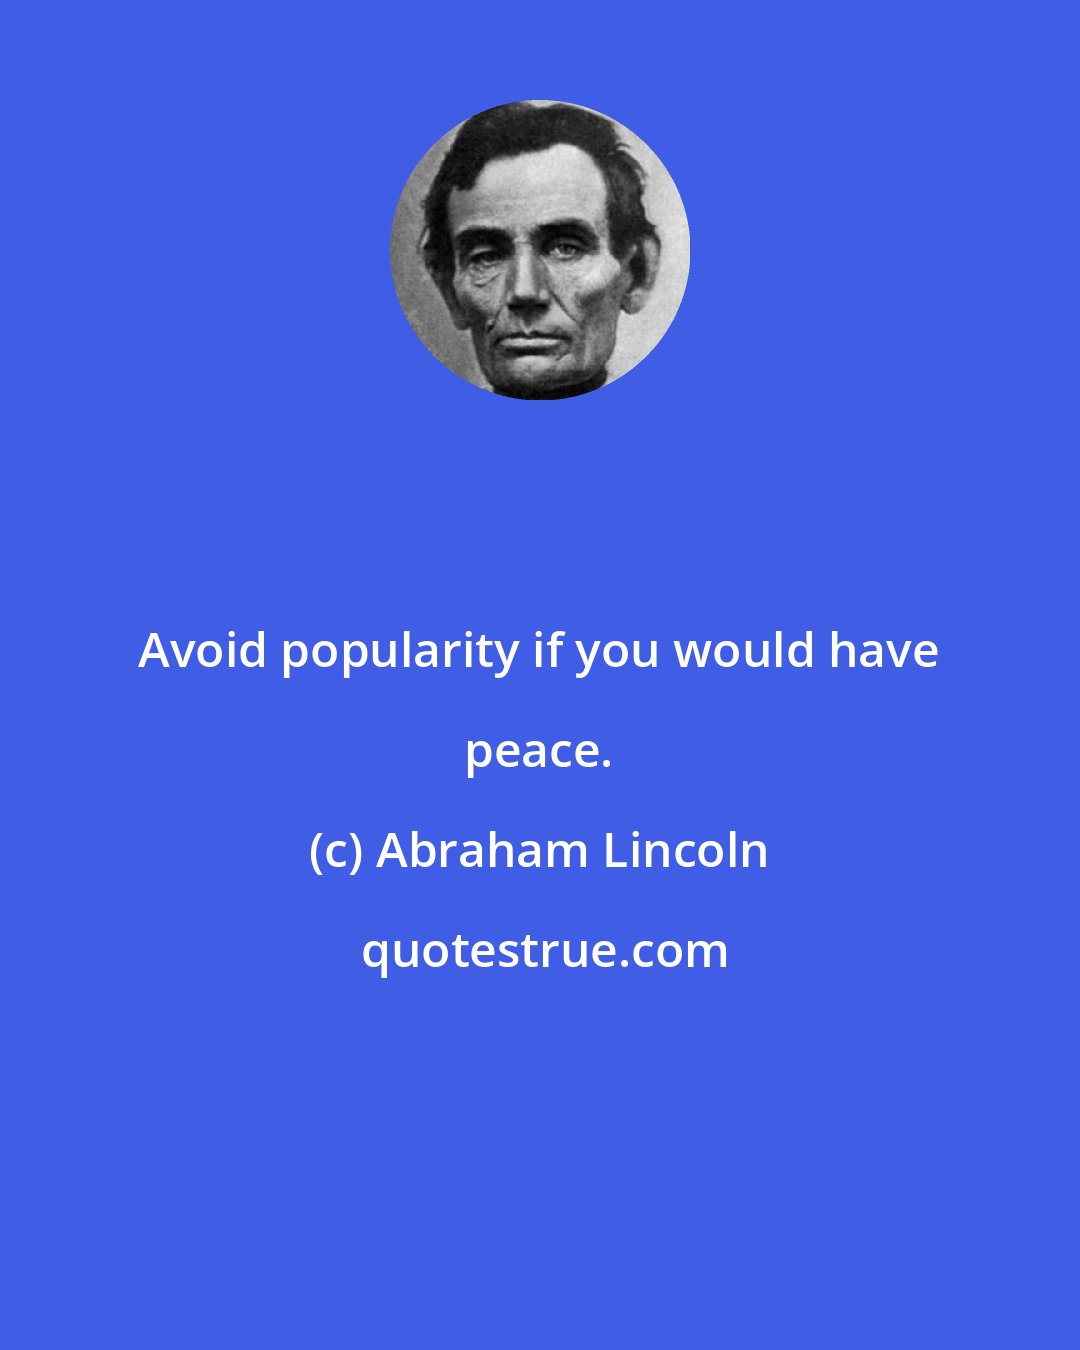 Abraham Lincoln: Avoid popularity if you would have peace.